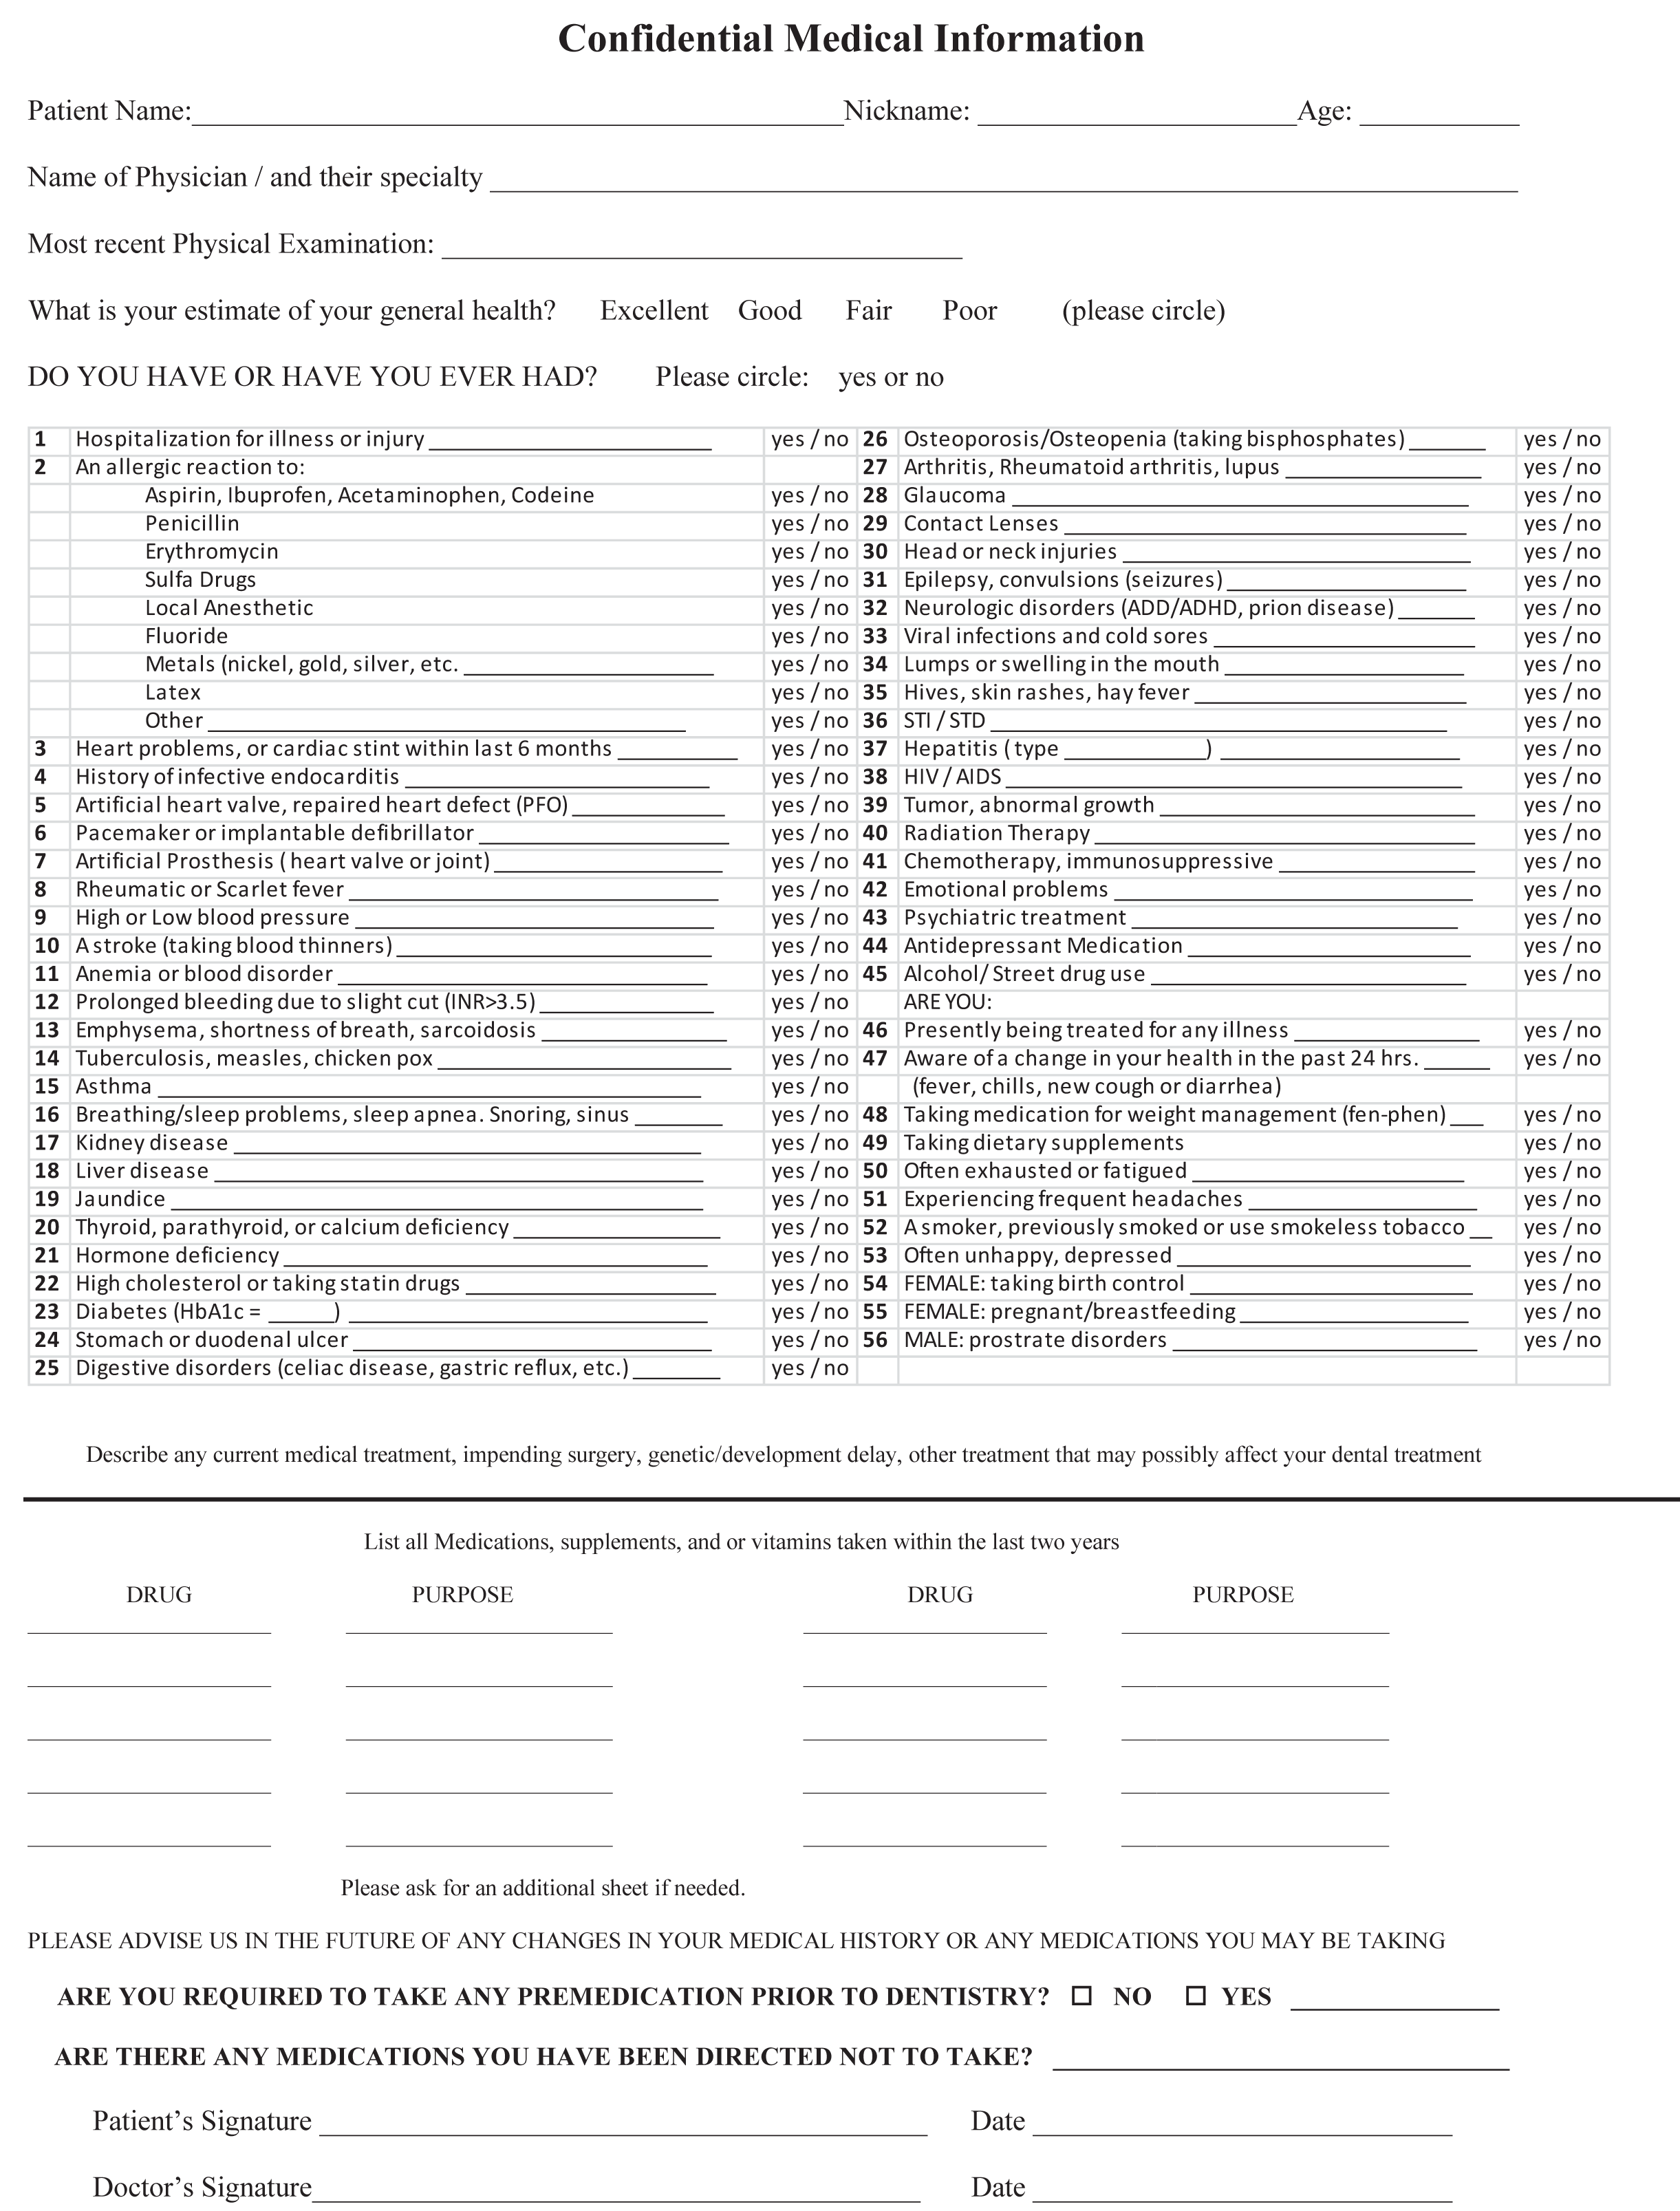 New Patient Dental Forms Templates